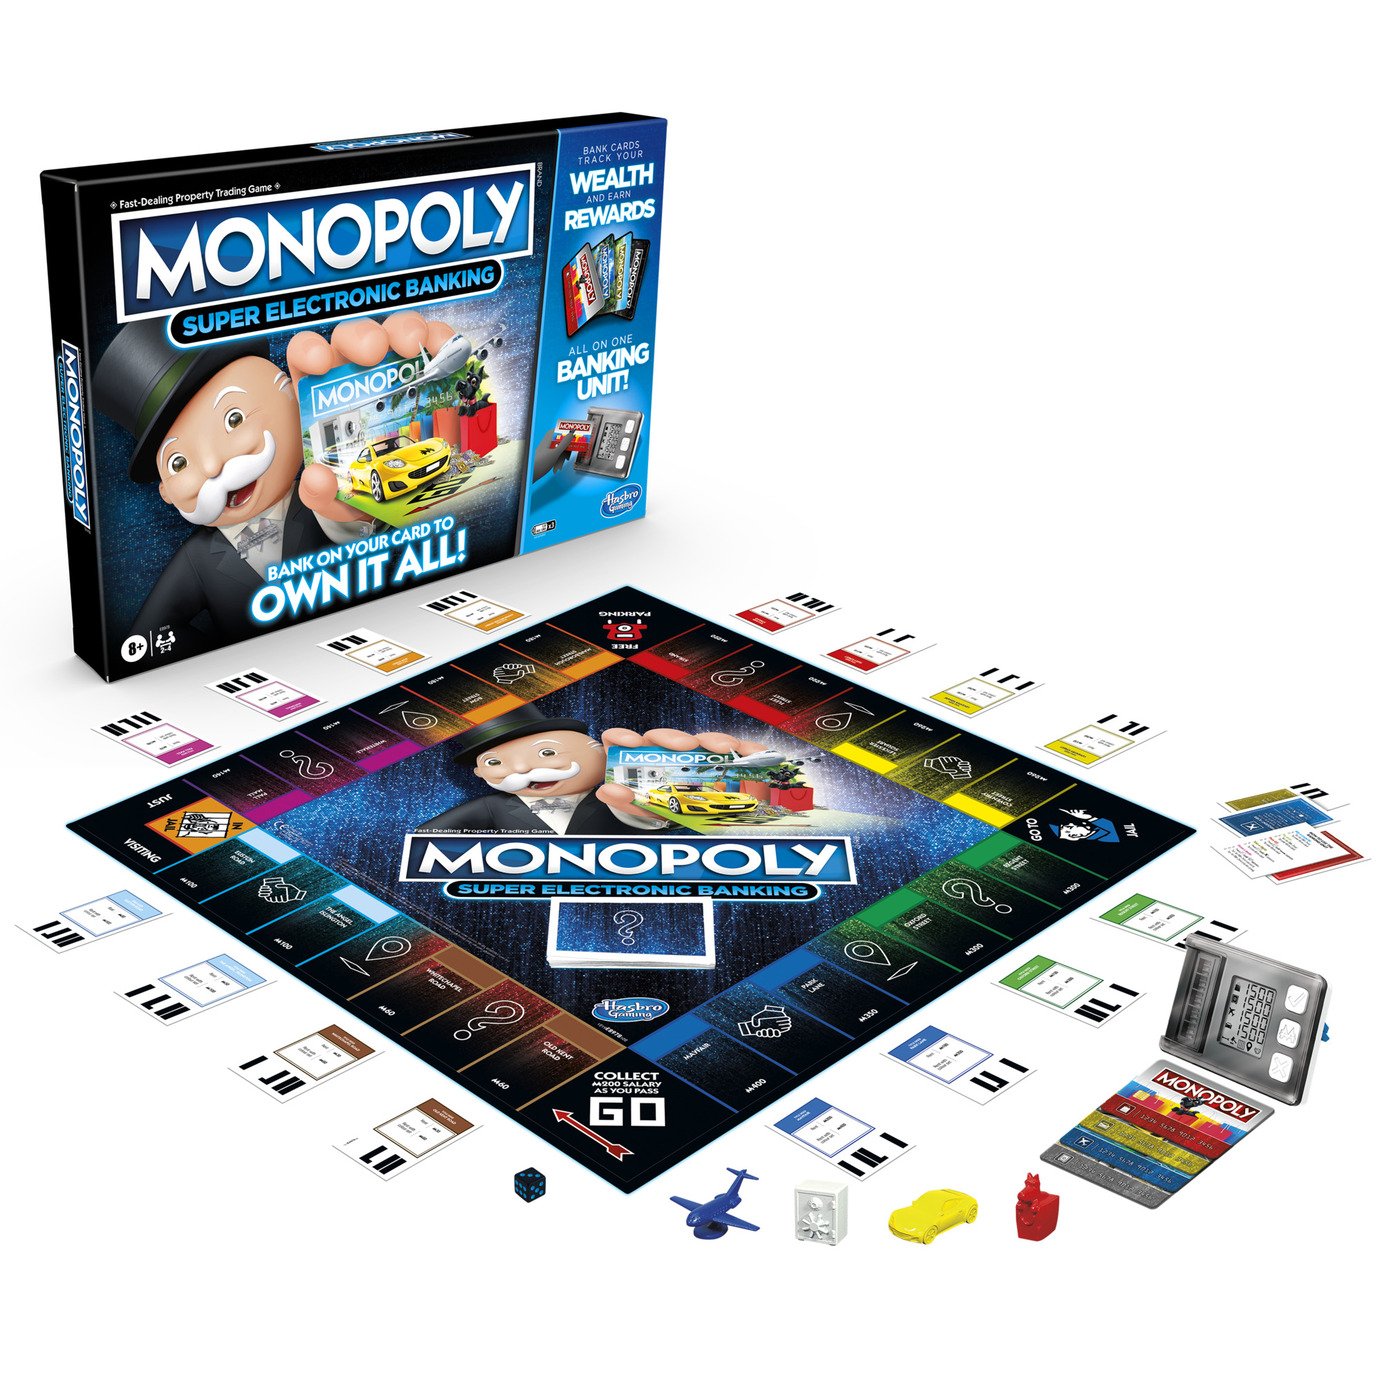 Monopoly Super Electronic Banking from Hasbro Gaming Review